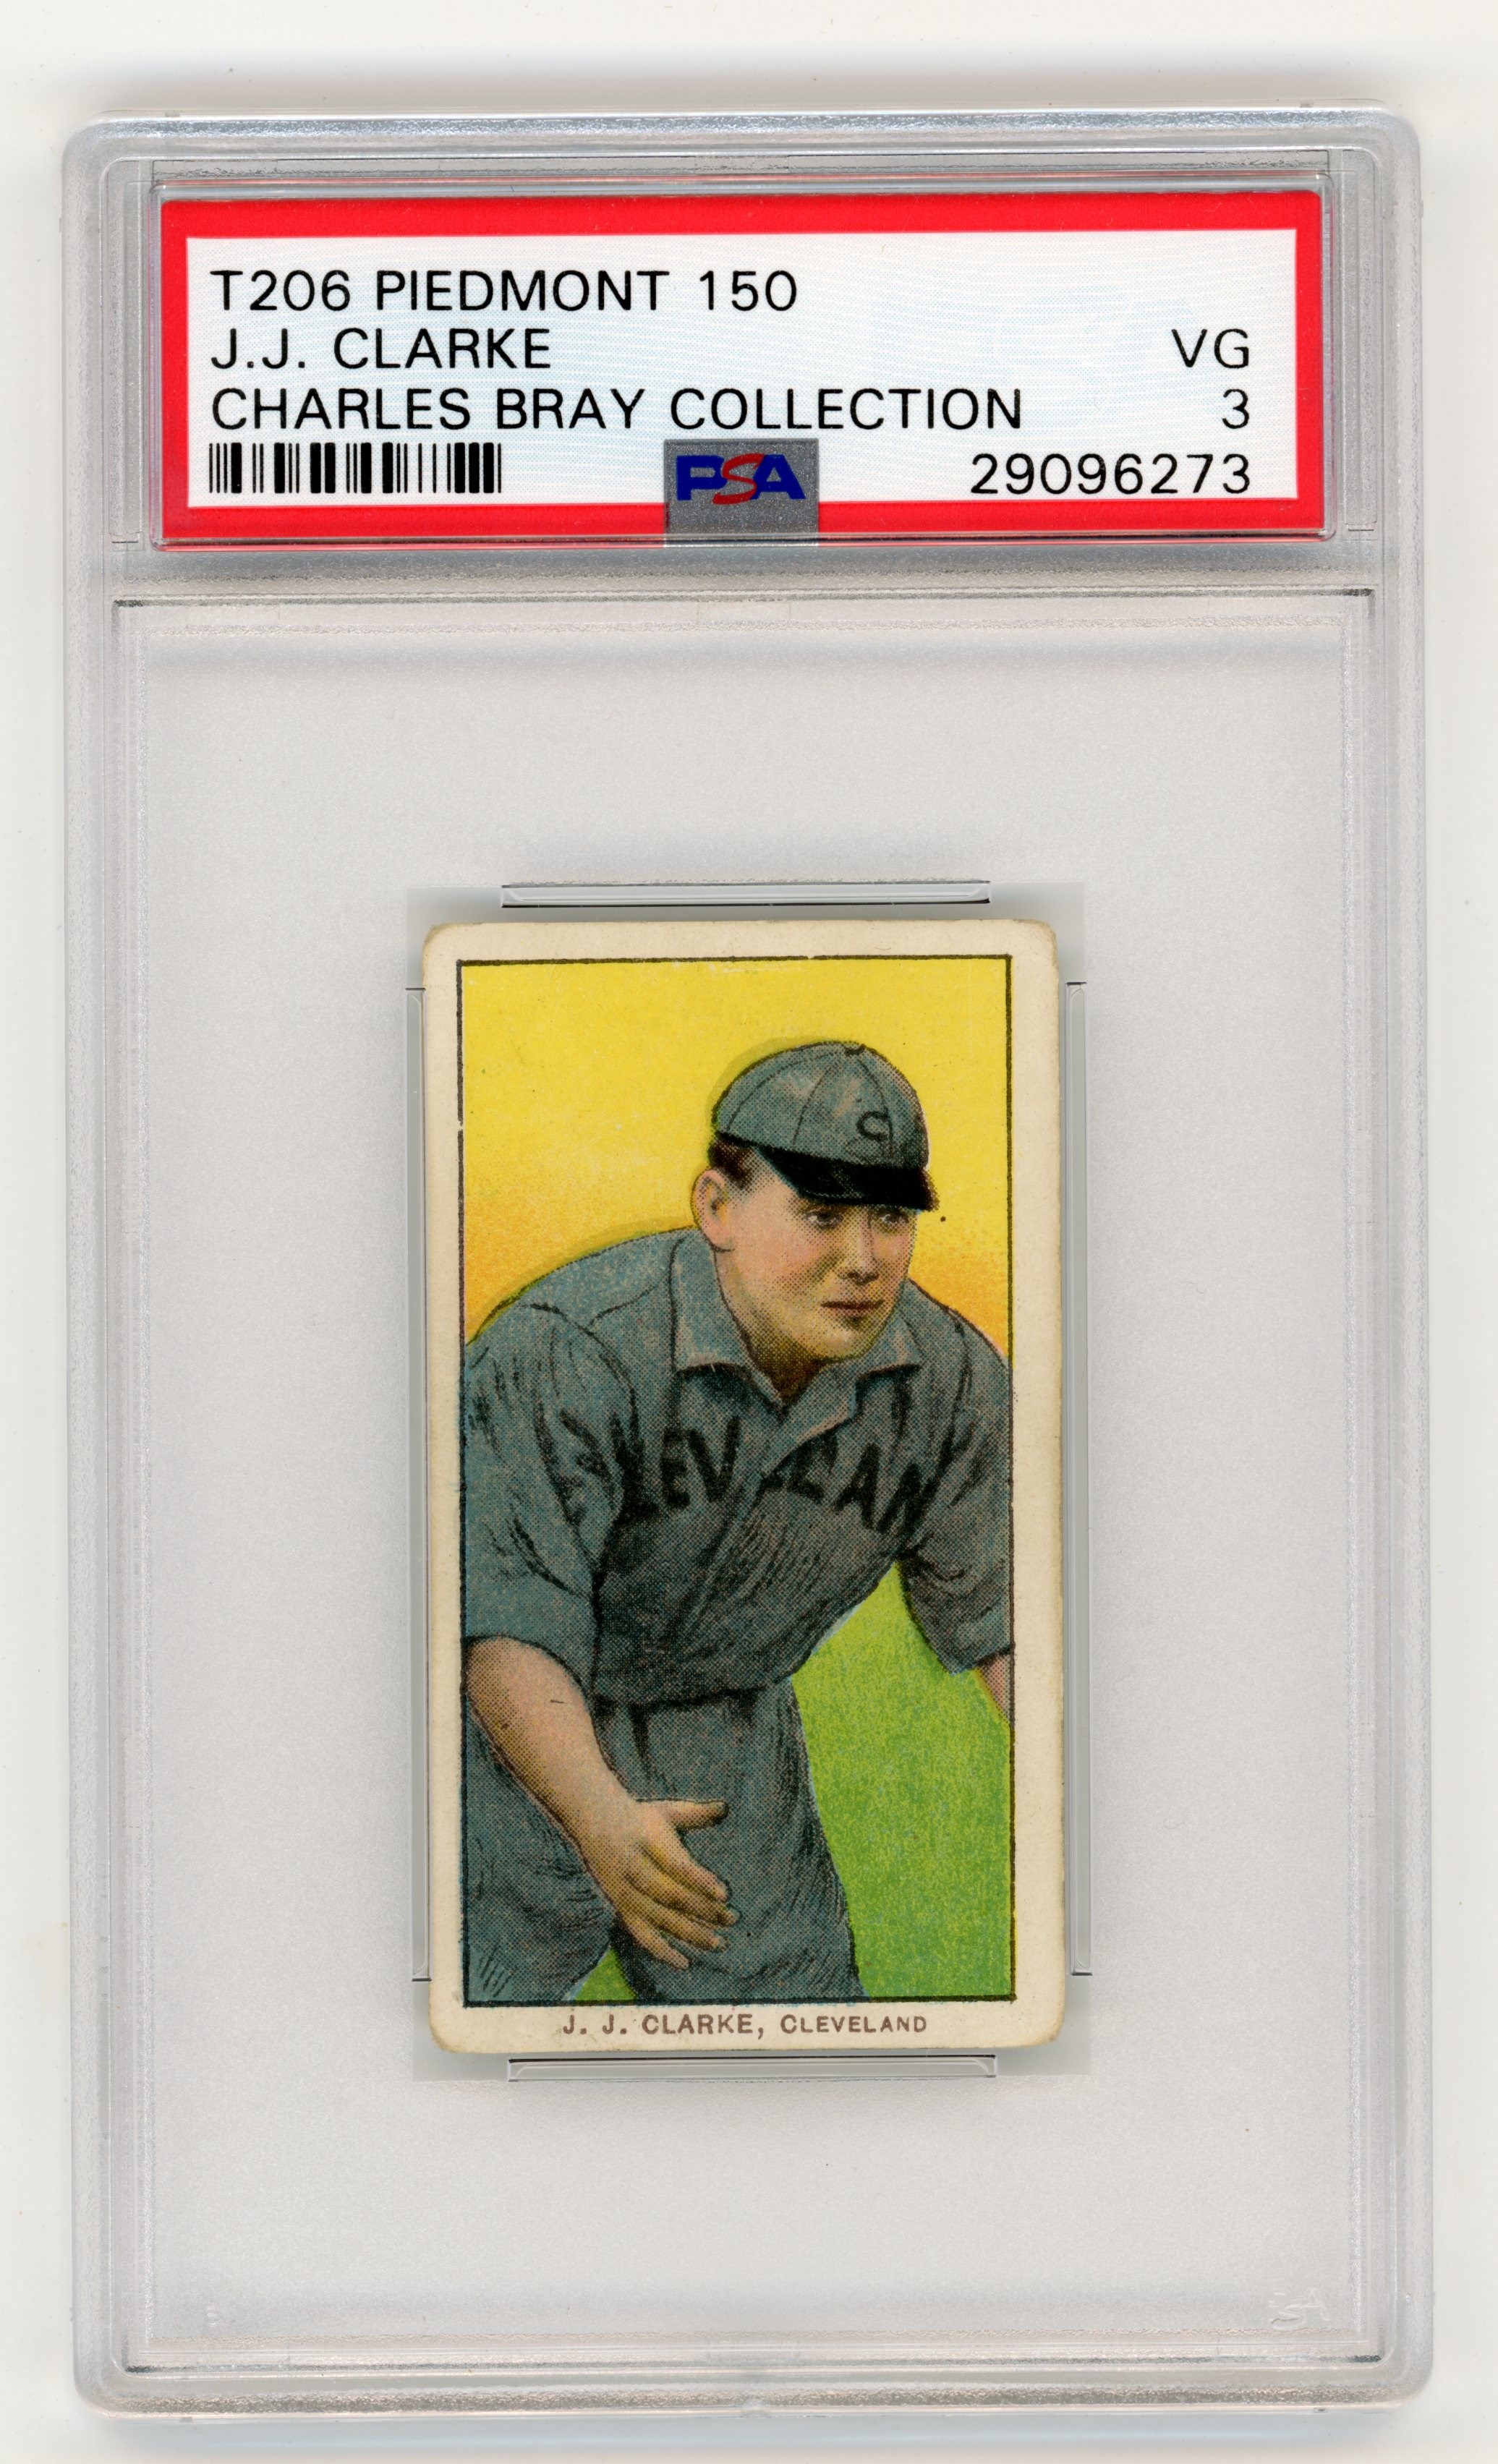 Baseball and Trading Cards - T206 Piedmont 150 J.J. Clarke PSA 3 From Charles Bray Collection